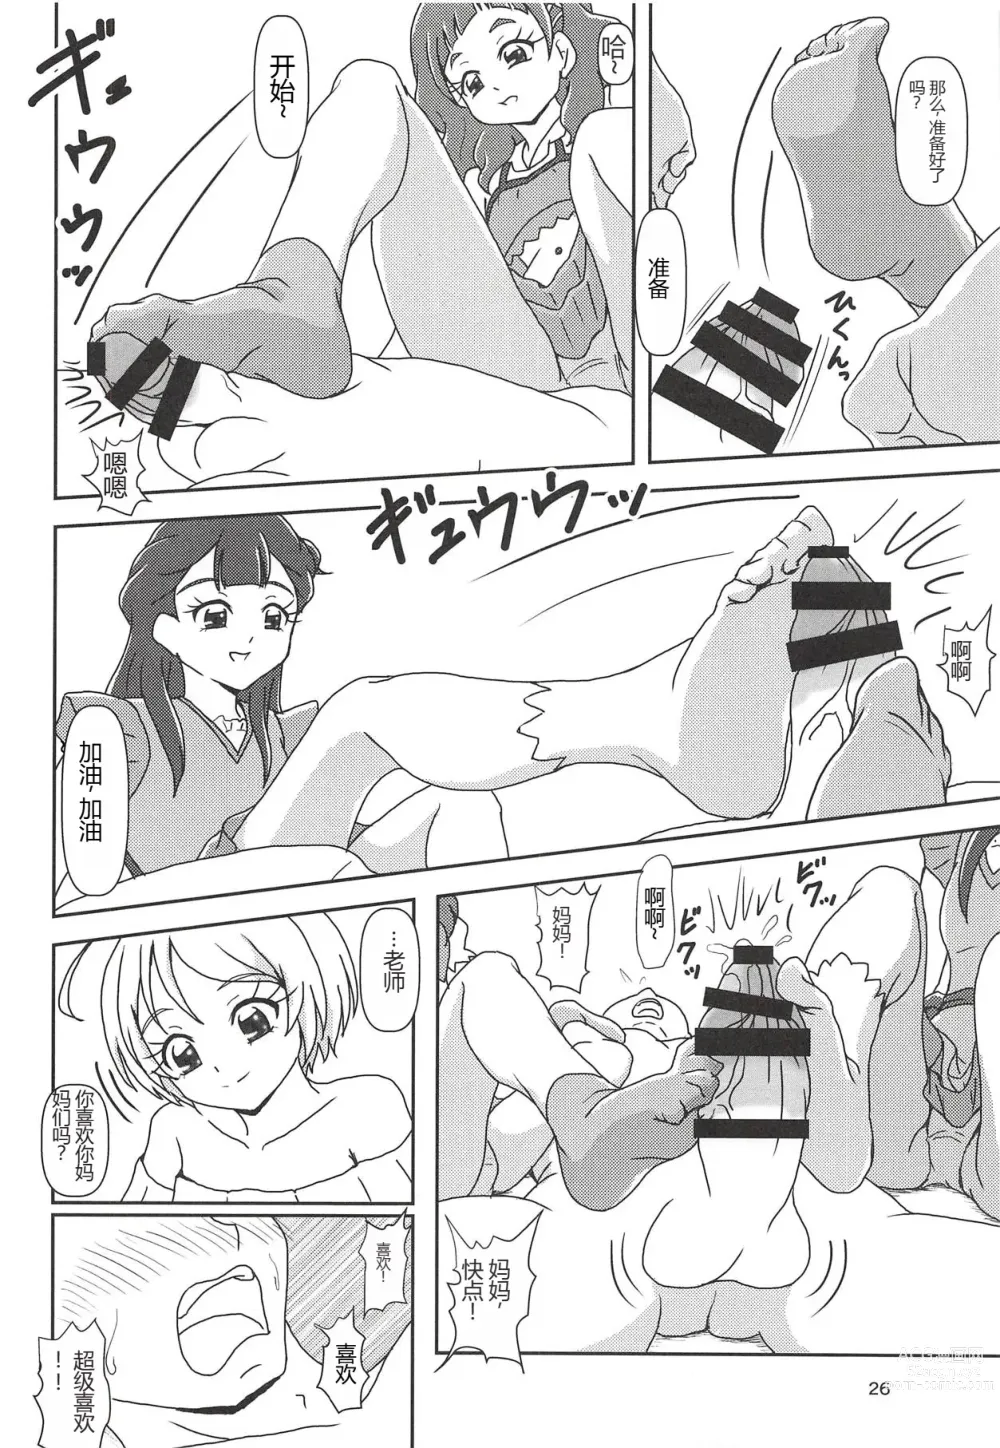 Page 25 of doujinshi Hugtto! Zuricure